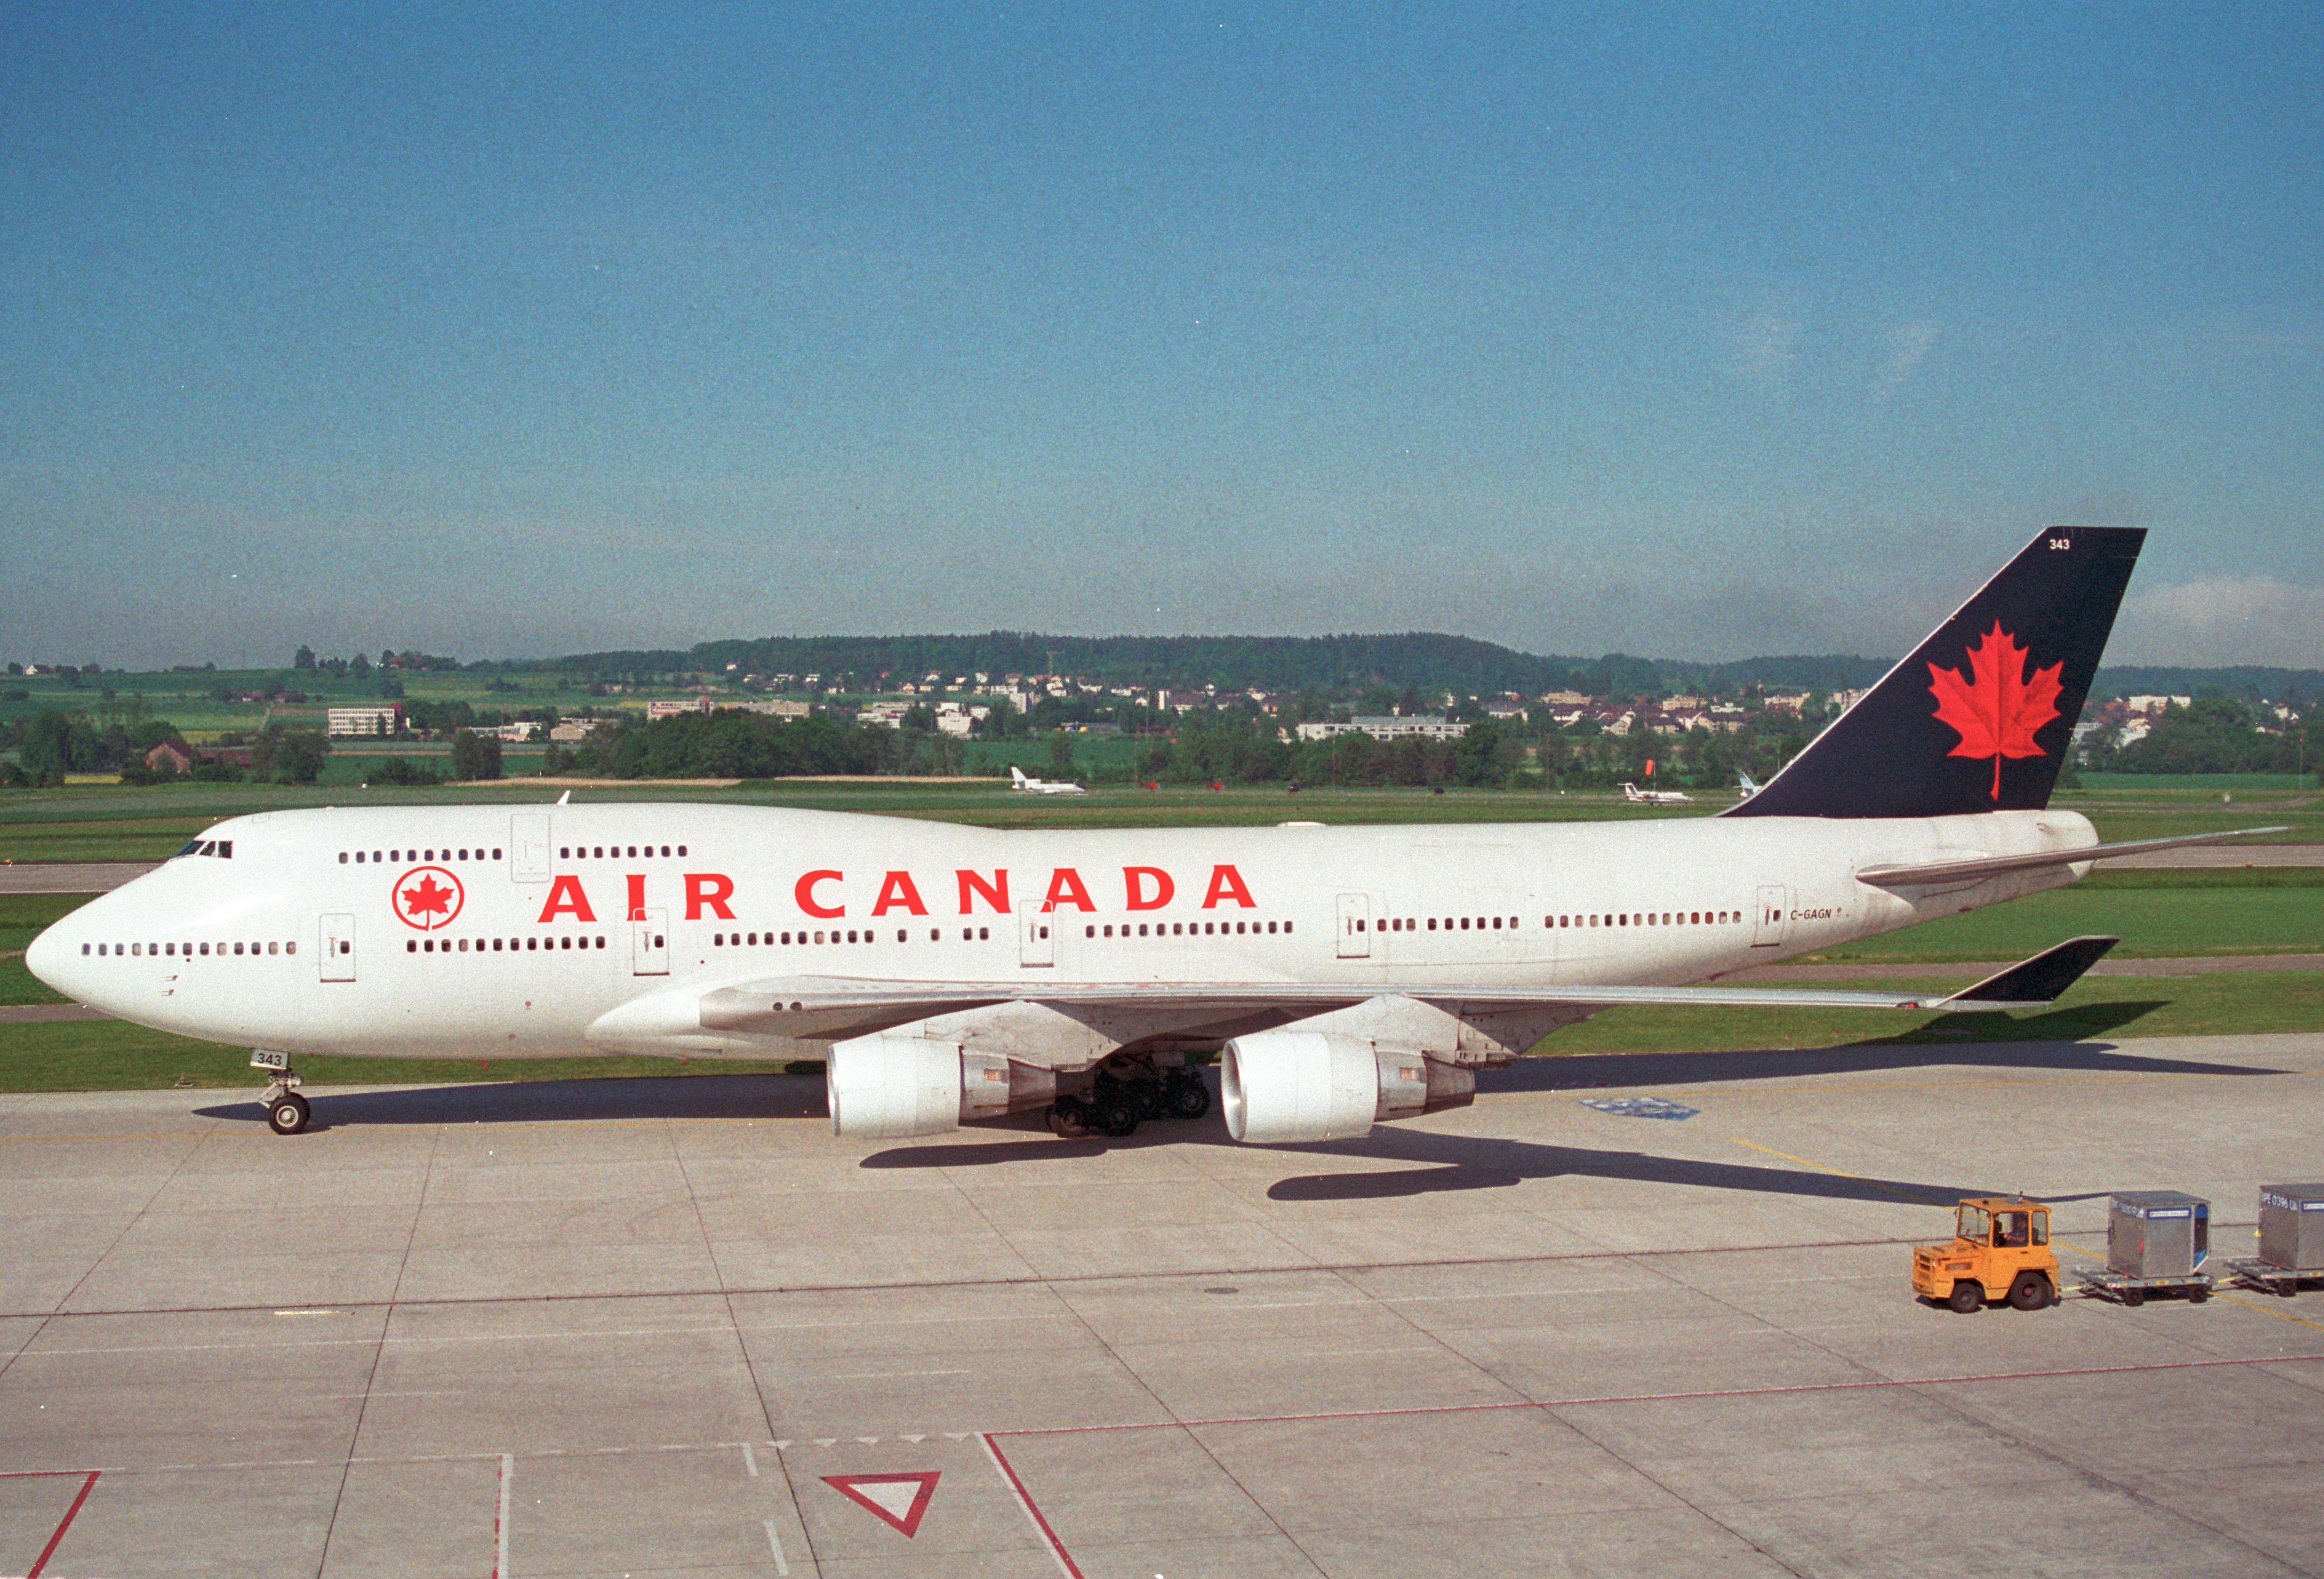 Air Canada Boeing 747 before its freighter conversion